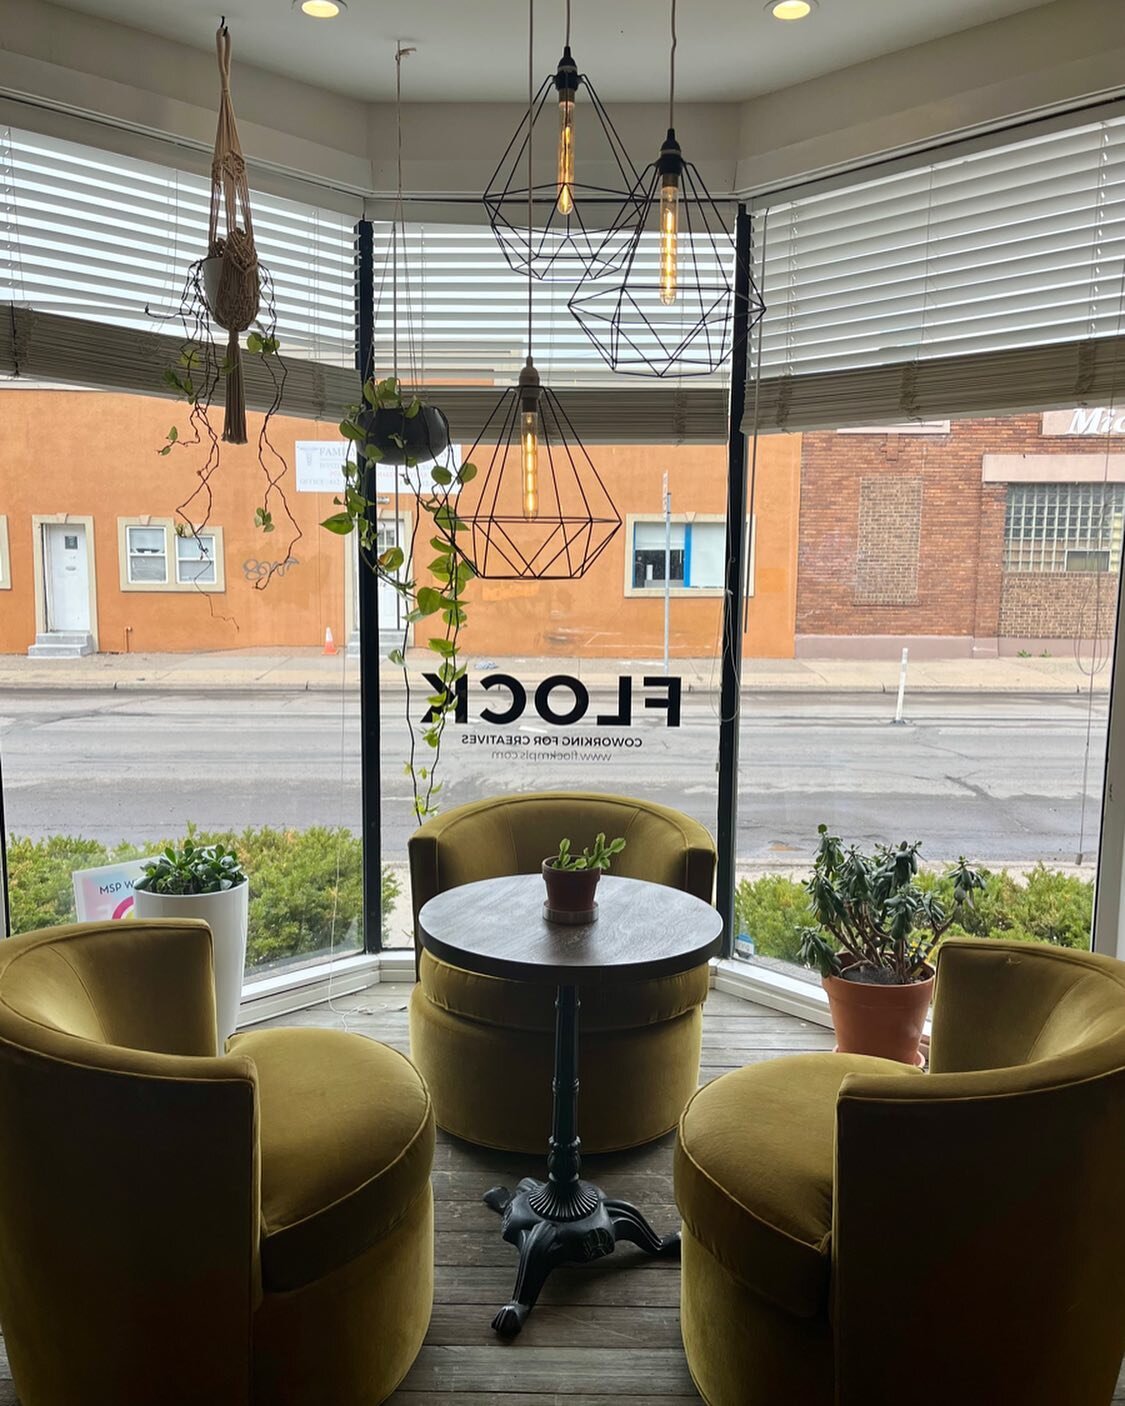 Choosing the right color palette is essential to creating an inspiring and welcoming space since colors can influence our mood and productivity.

~Our new, mustard window display represents warmth, creativity, optimism and diversity~
&bull;
&bull;
&b